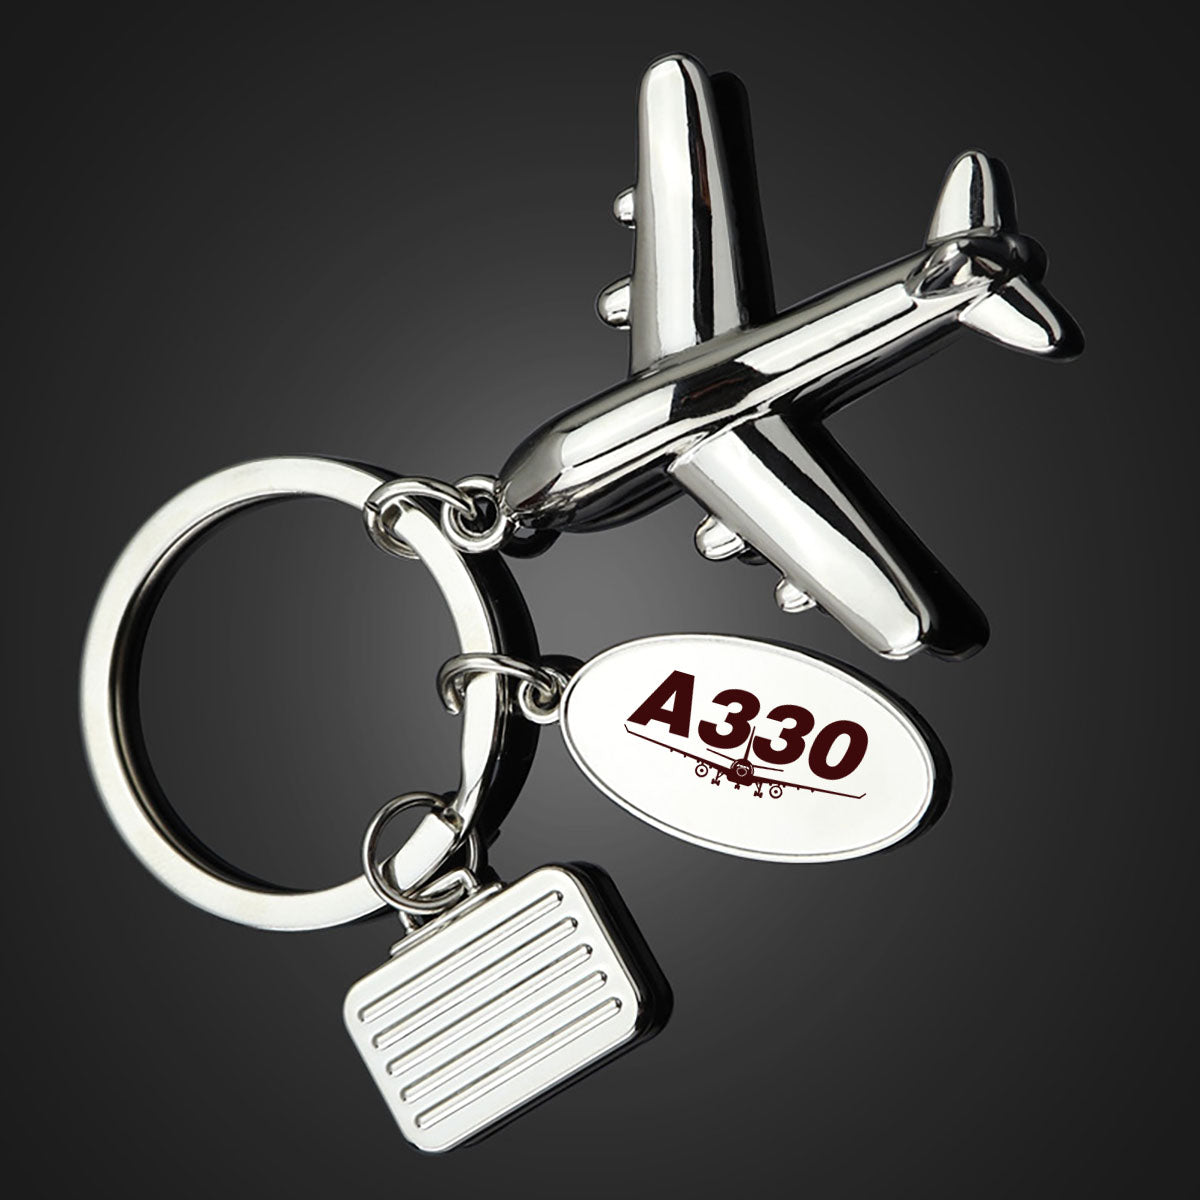 Super Airbus A330 Designed Suitcase Airplane Key Chains